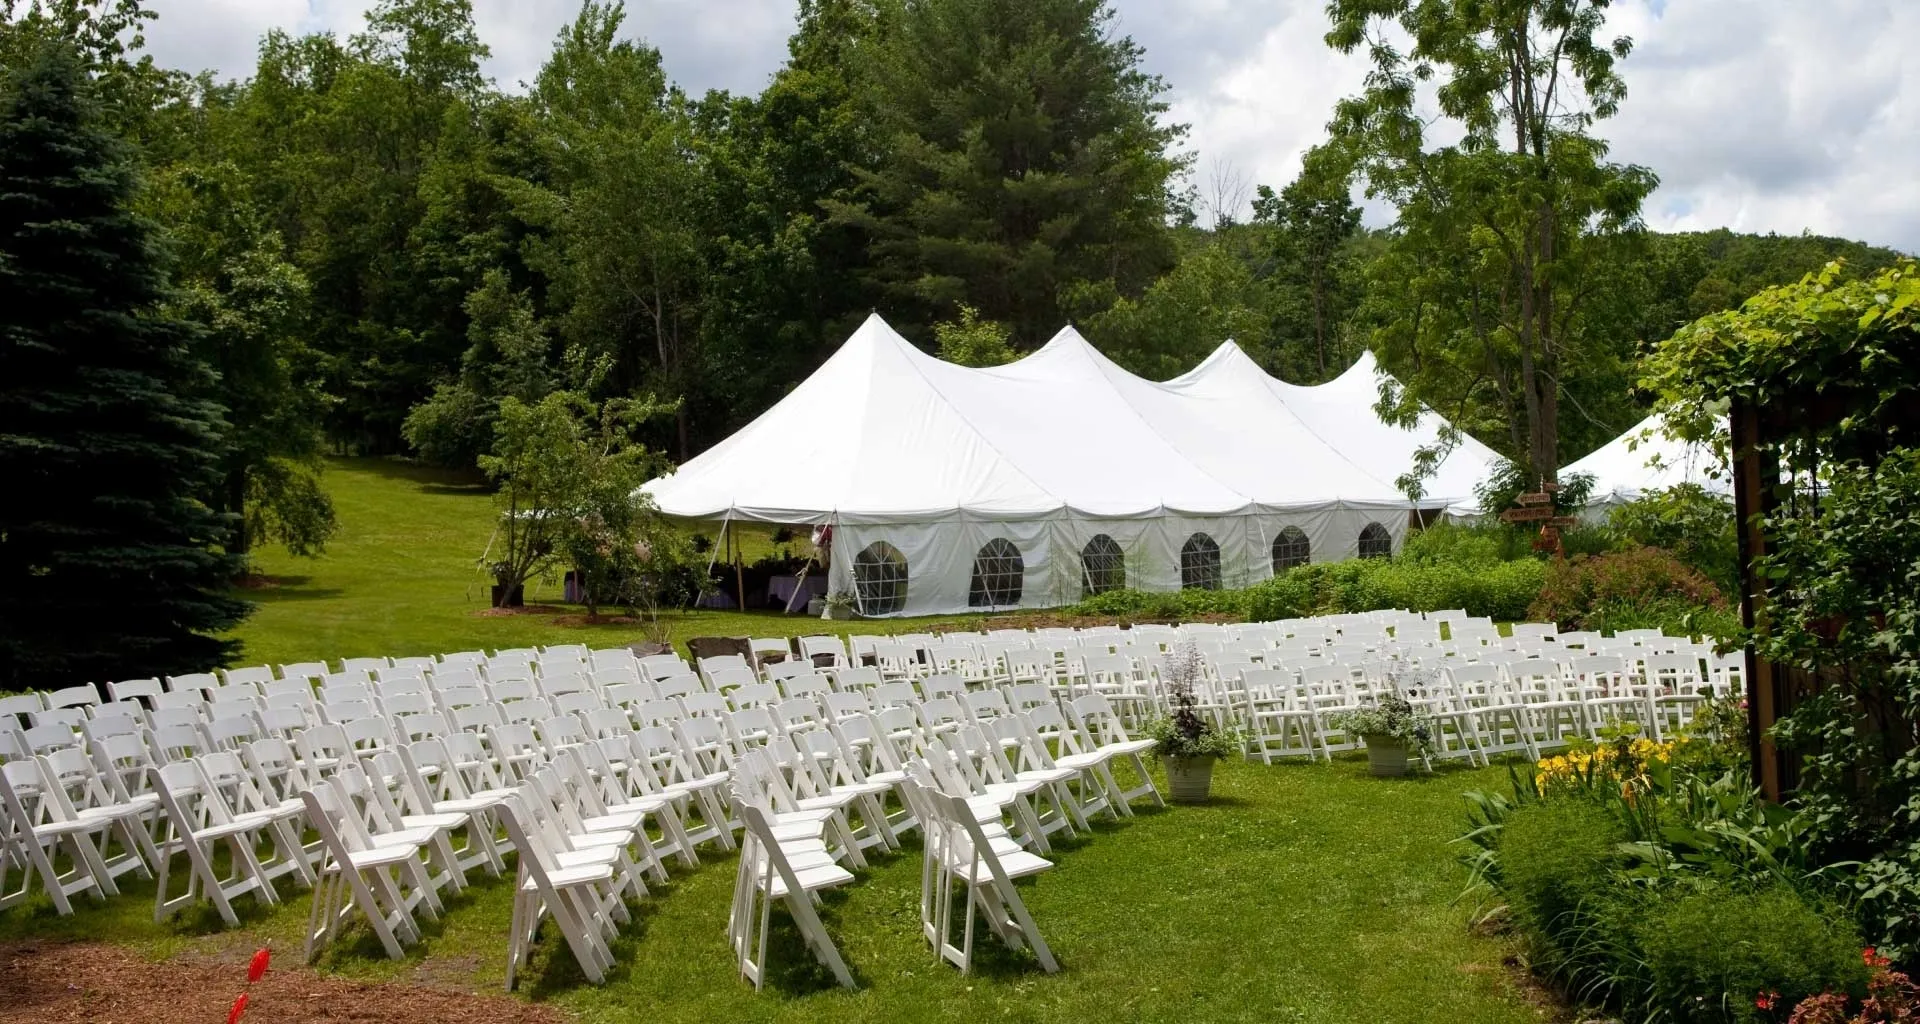 A large white tent with many chairs in the grass.